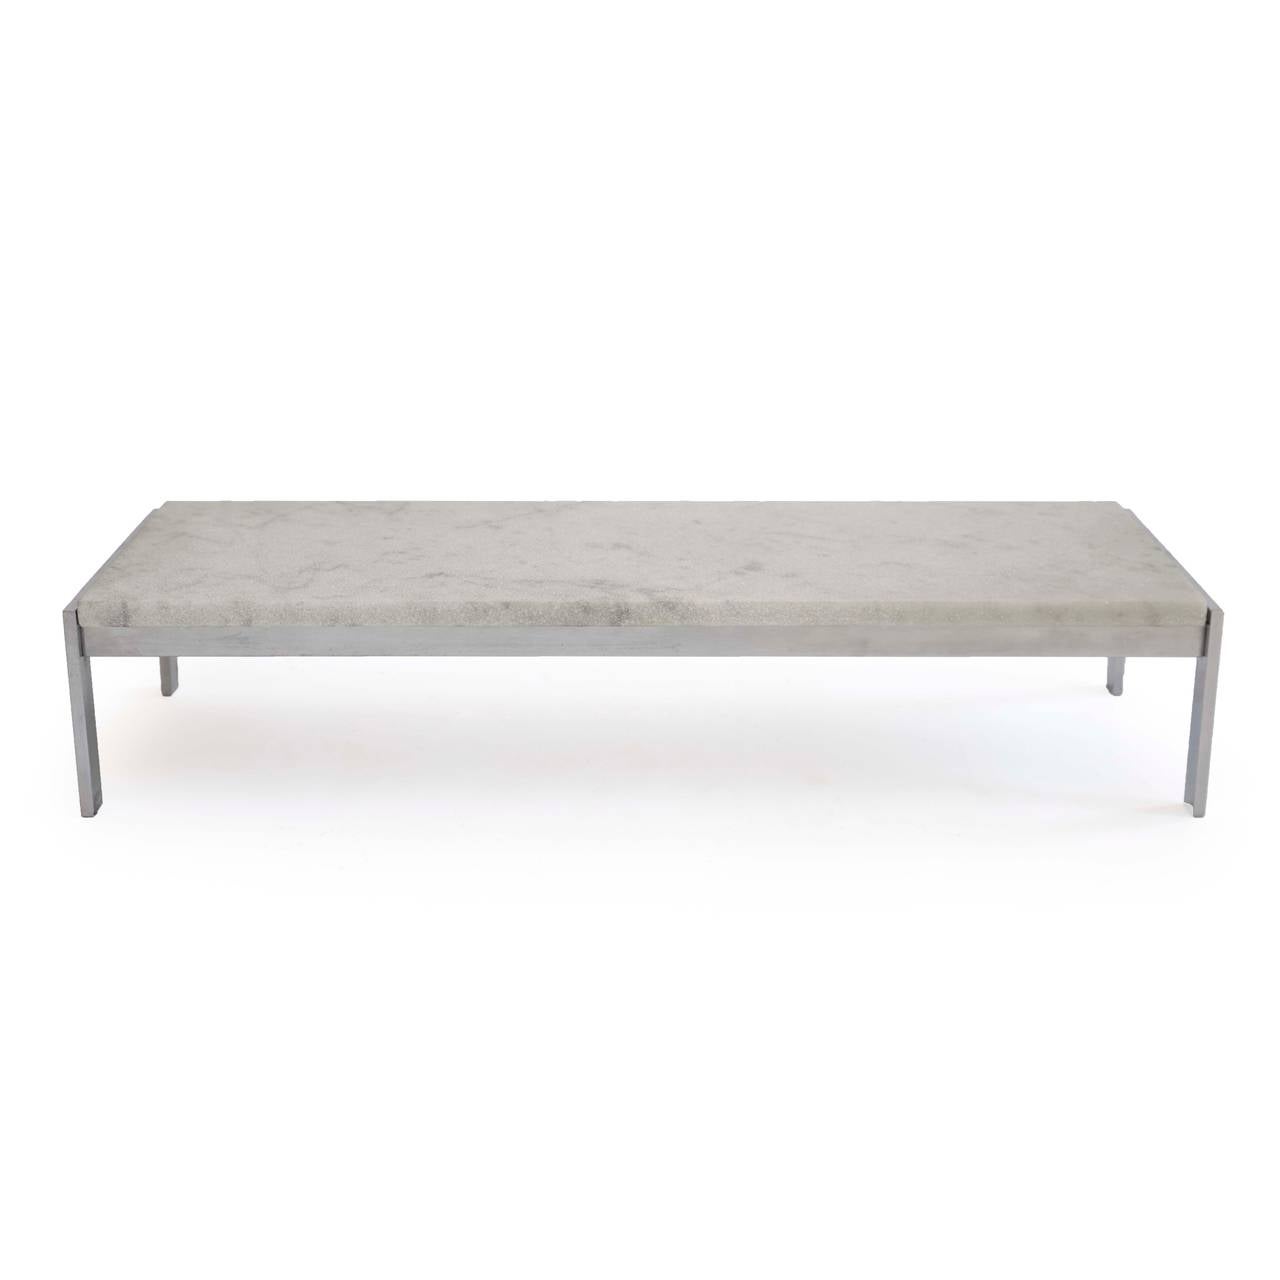 Poul Kjaerholm PK62 side table with frame of steel, original top of 2 cm flint-rolled white marble. 

Designed by Poul Kjaerholm 1968 and made by E. Kold Christensen, marked with manufacture's mark to each end bar. 

Often used as side table for